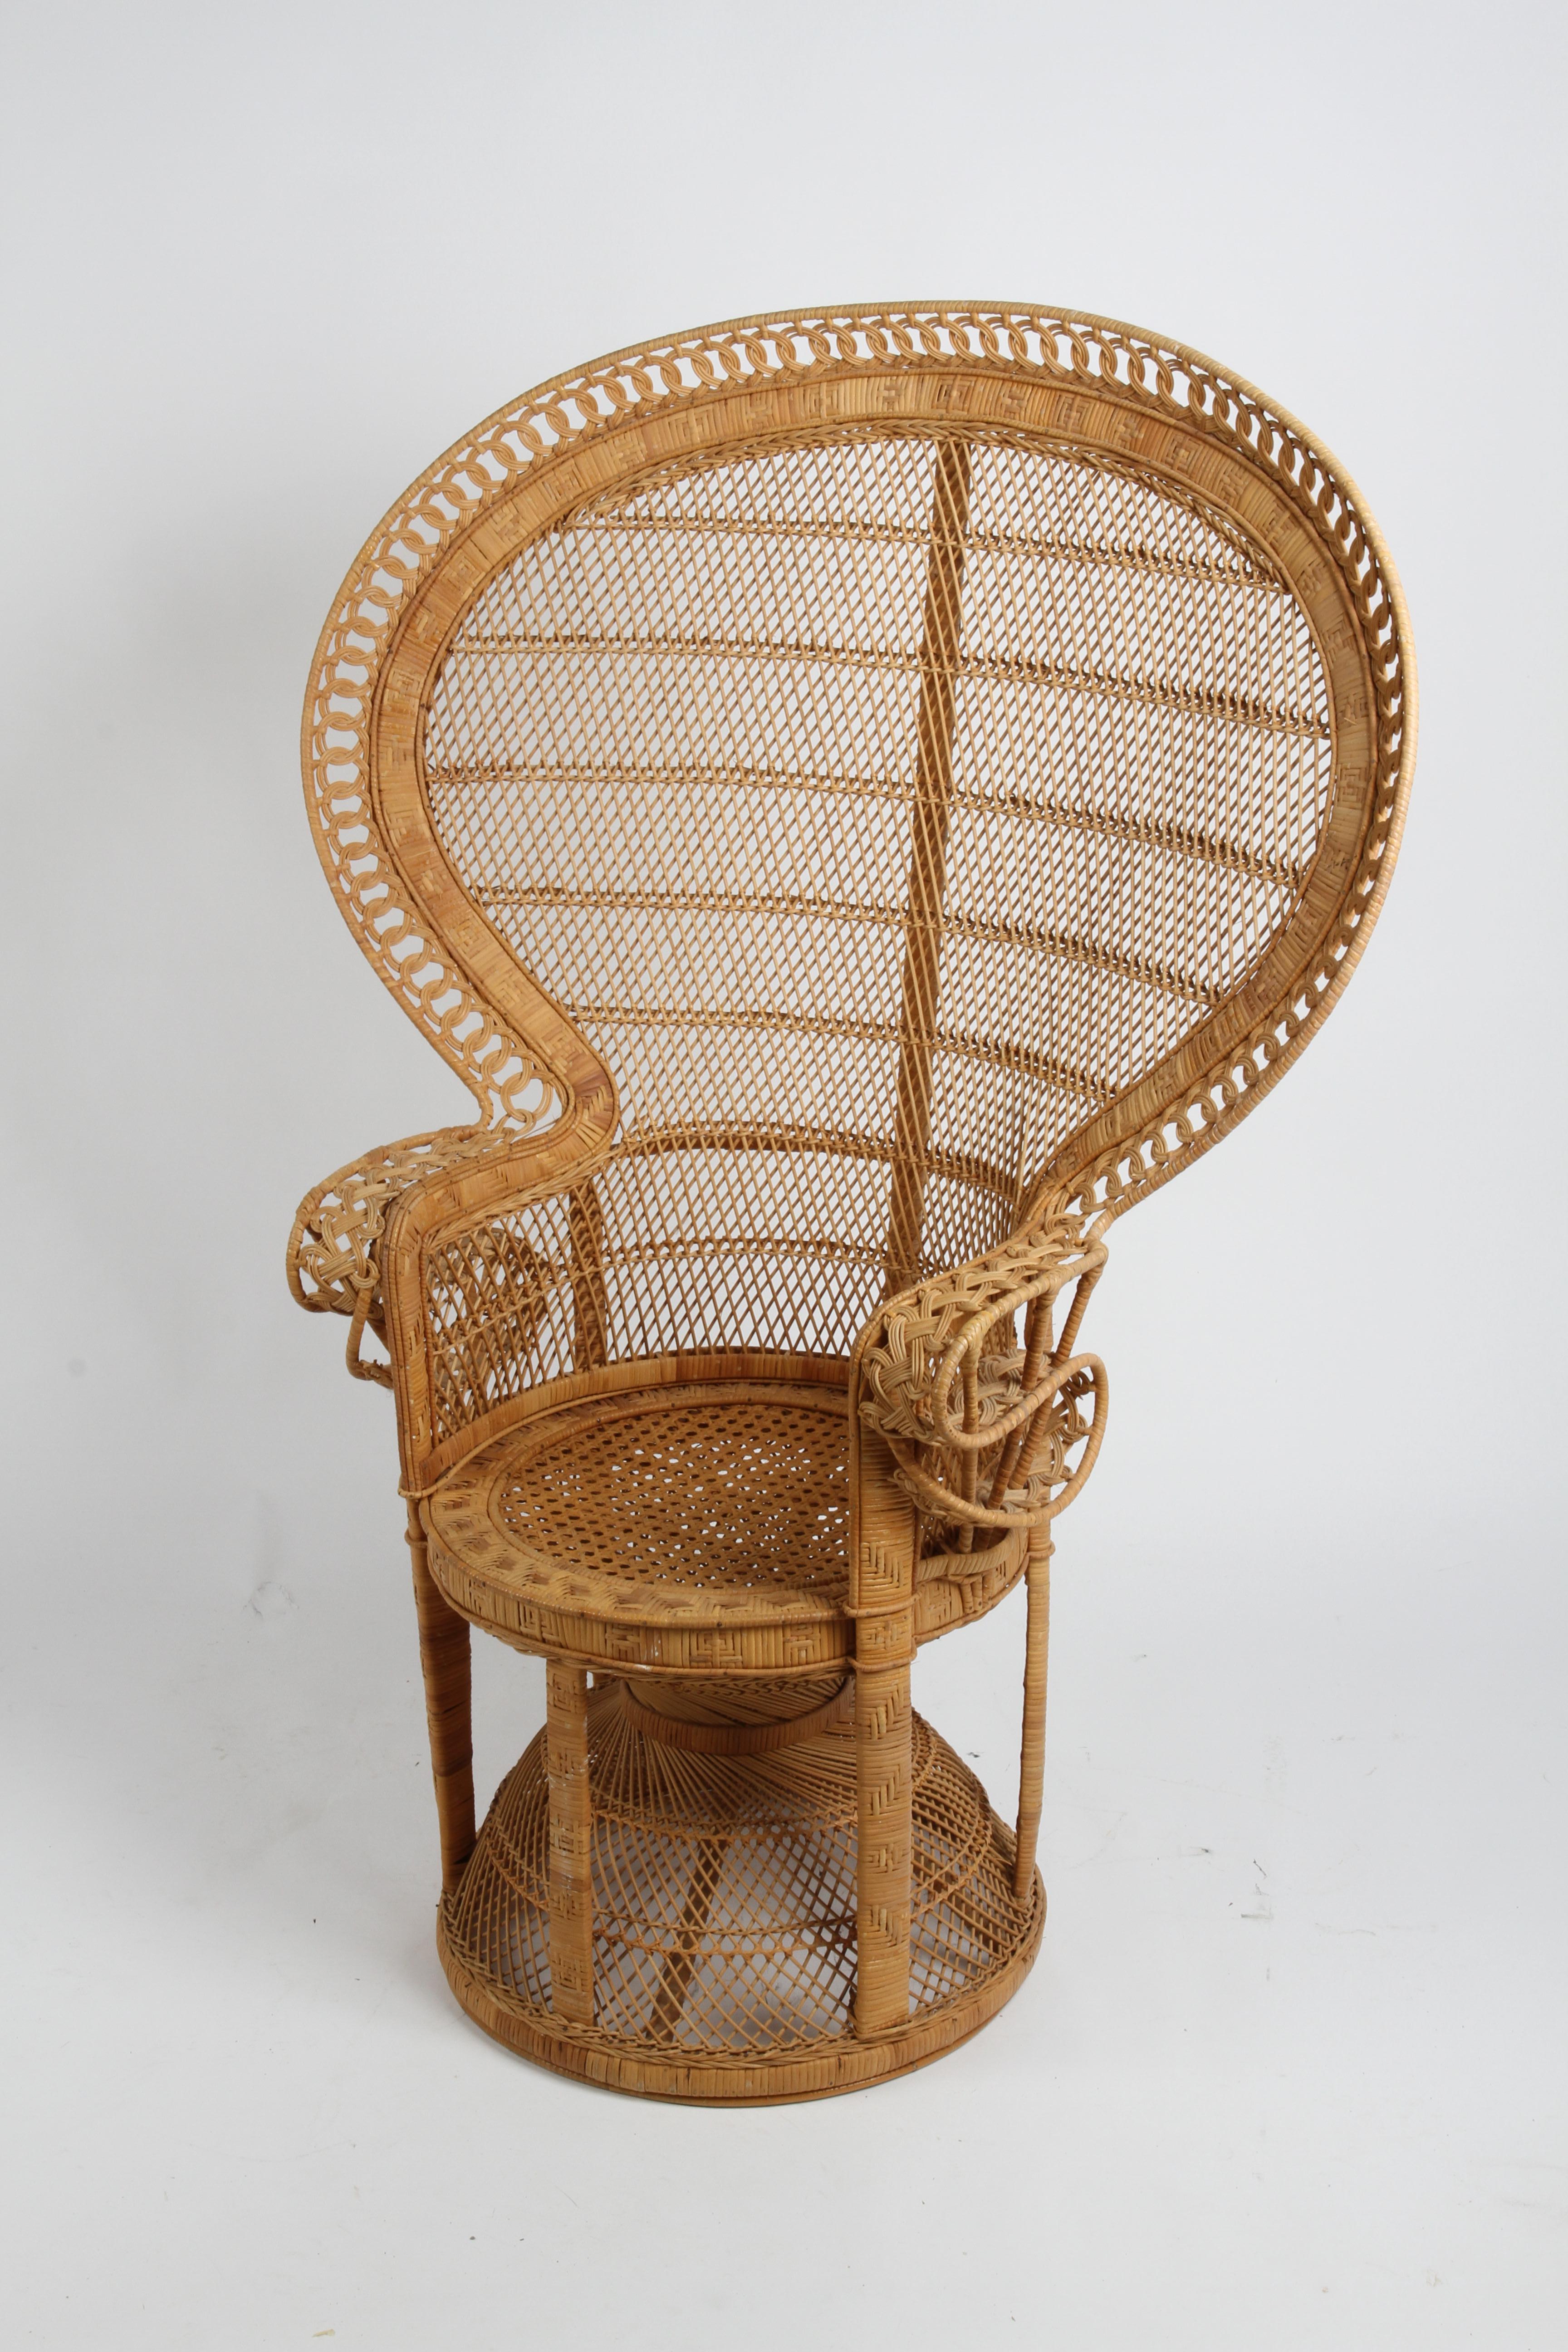 Vintage 1970s Rattan & Wicker Handcrafted Boho Chic Emmanuelle Peacock Chair 7